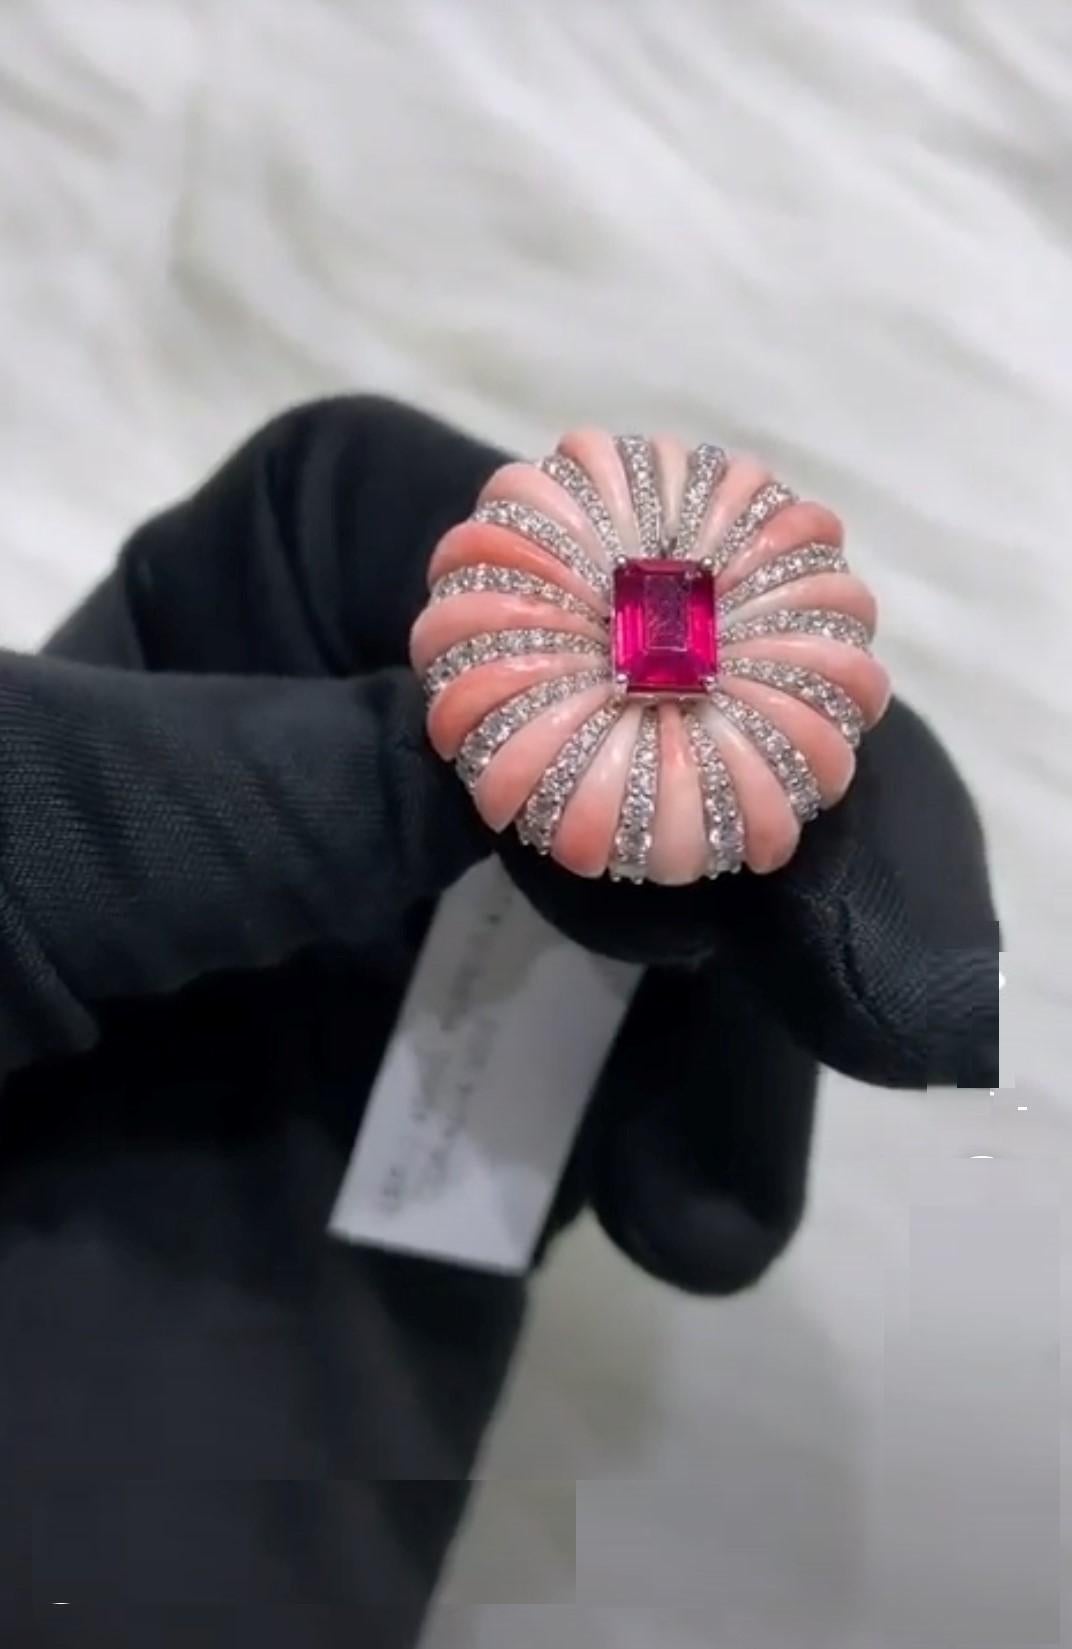 The Following Item we are offering is a Rare Important Radiant White Gold Large Fancy Coral Ruby Diamond Ring. Ring is comprised of A Gorgeous Fancy Fiery Ruby surrounded with Exquisite Rare Coral and  Glittering Diamonds T.C.W APPROX 9.50 CTS!!!